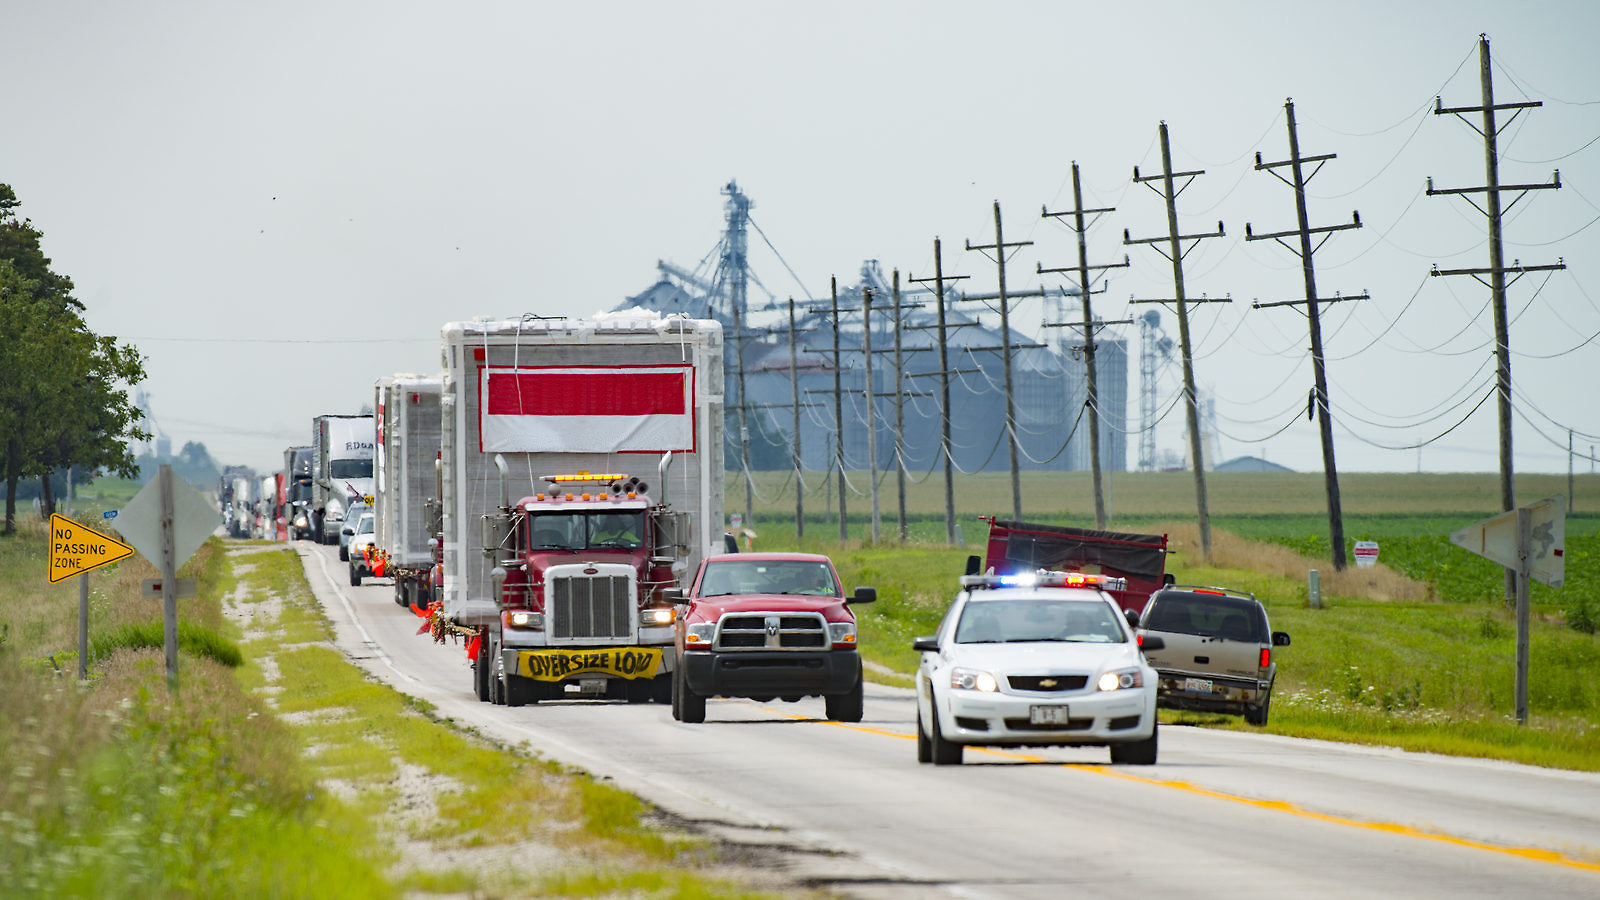 Move of ICARUS detector from Morris, IL to Fermilab site